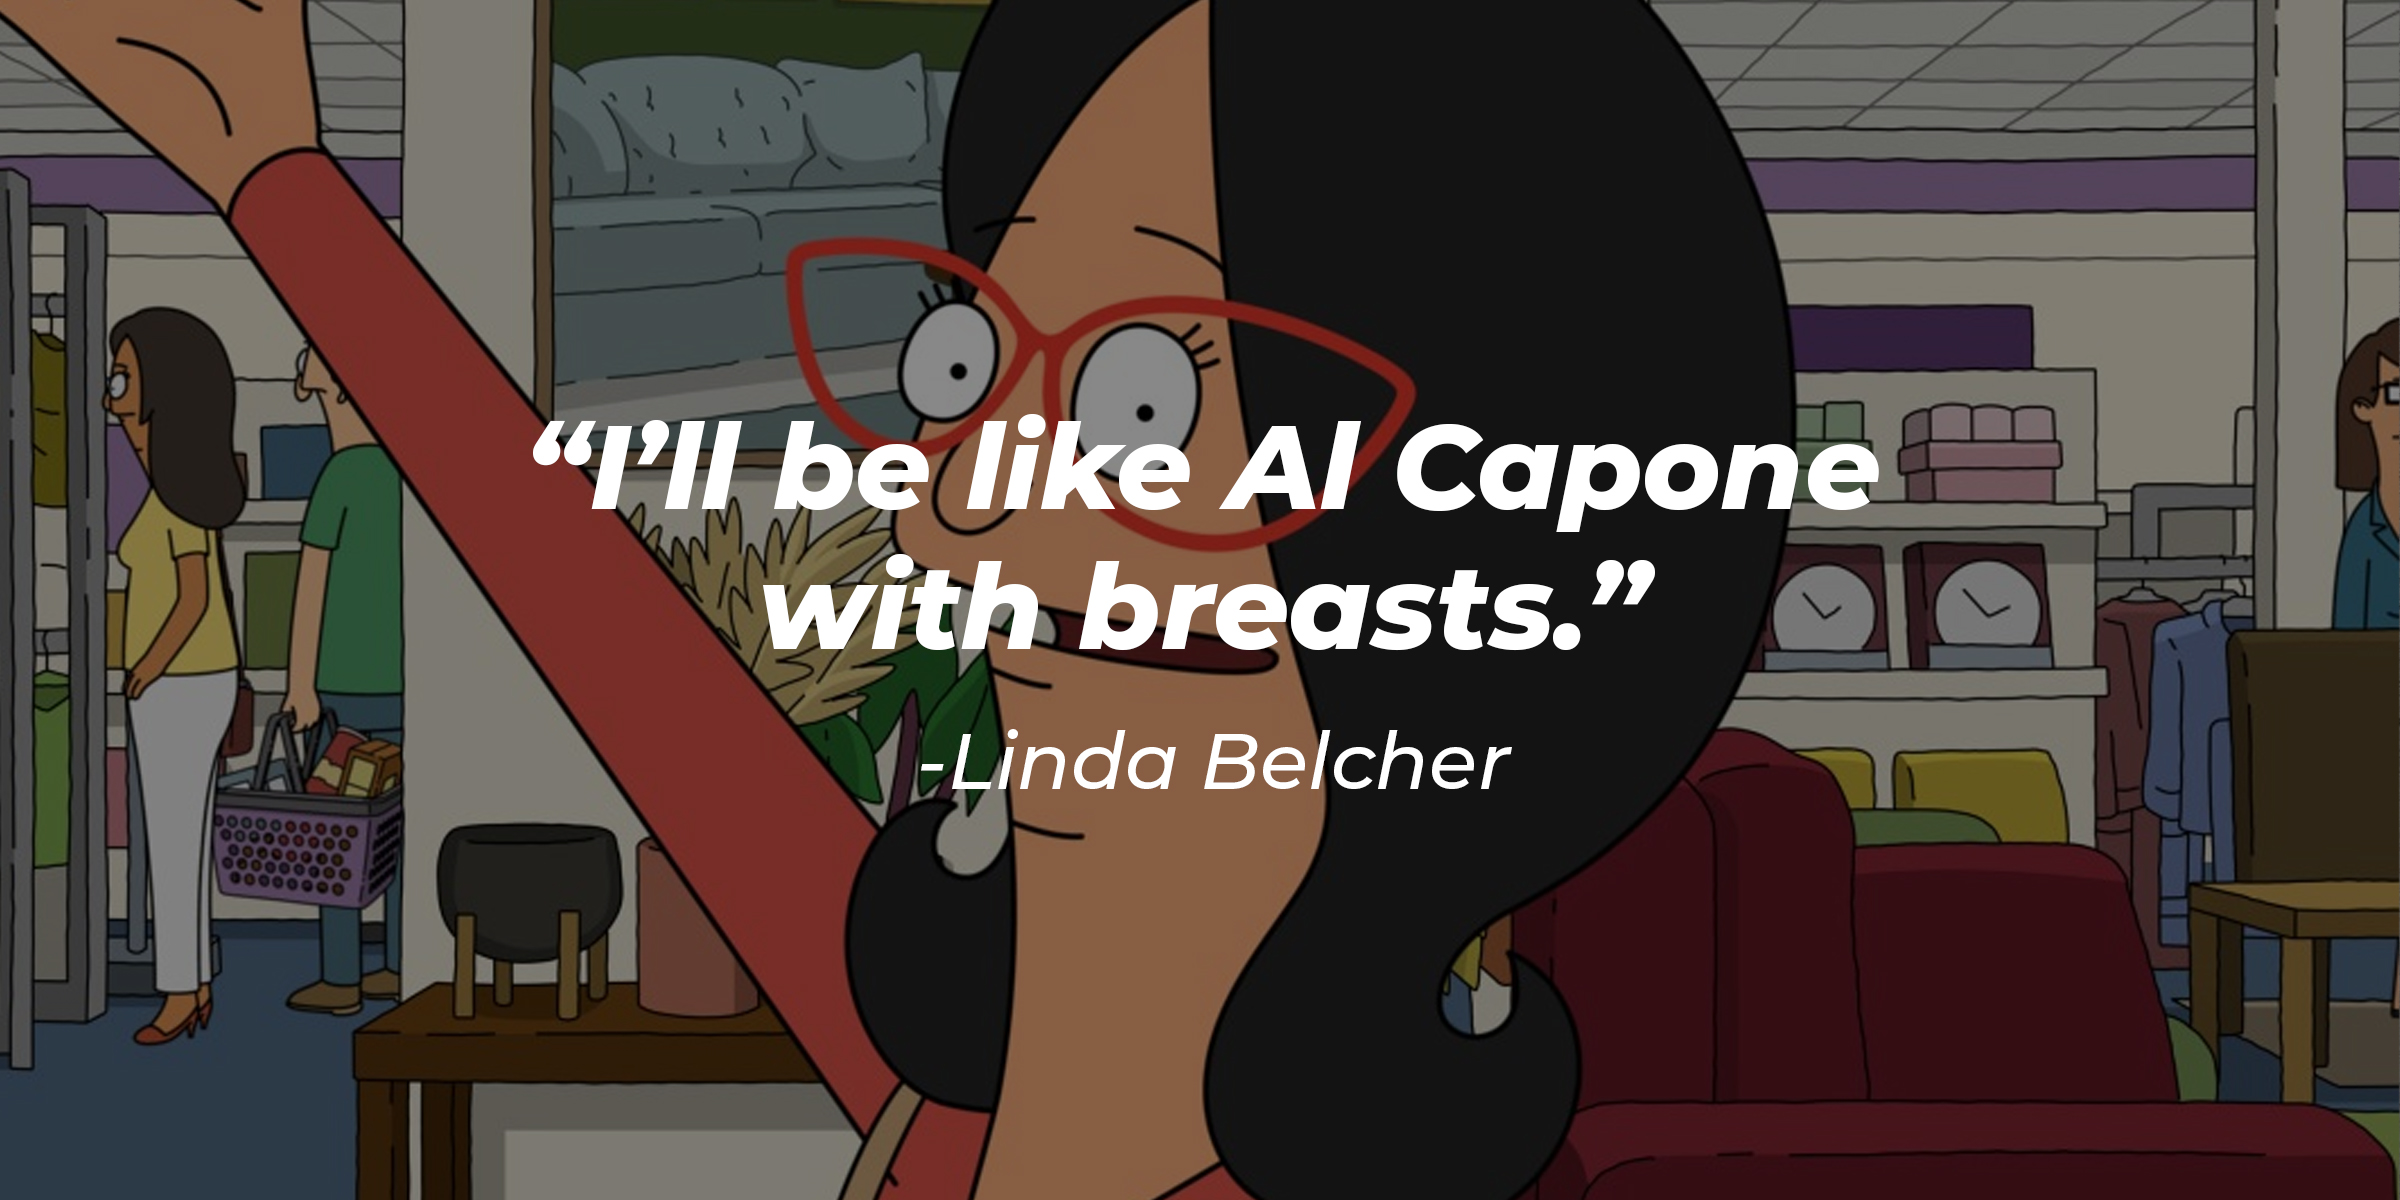 Linda Belcher, with her quote: “I’ll be like Al Capone with breasts.” | Source: Facebook.com/BobsBurgers